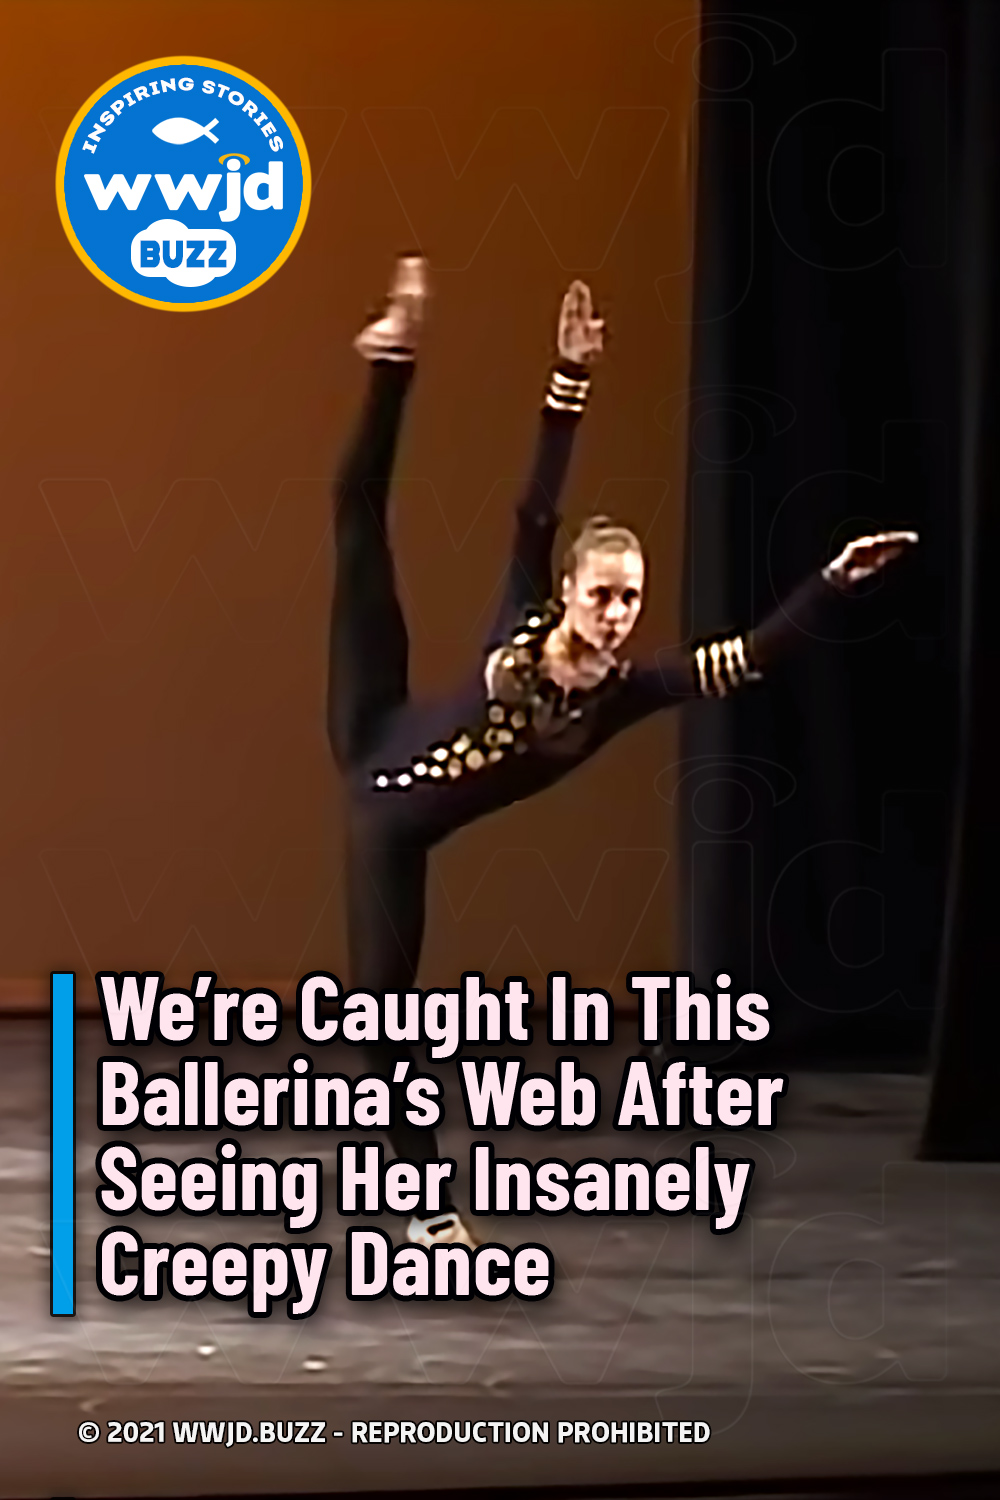 We’re Caught In This Ballerina’s Web After Seeing Her Insanely Creepy Dance